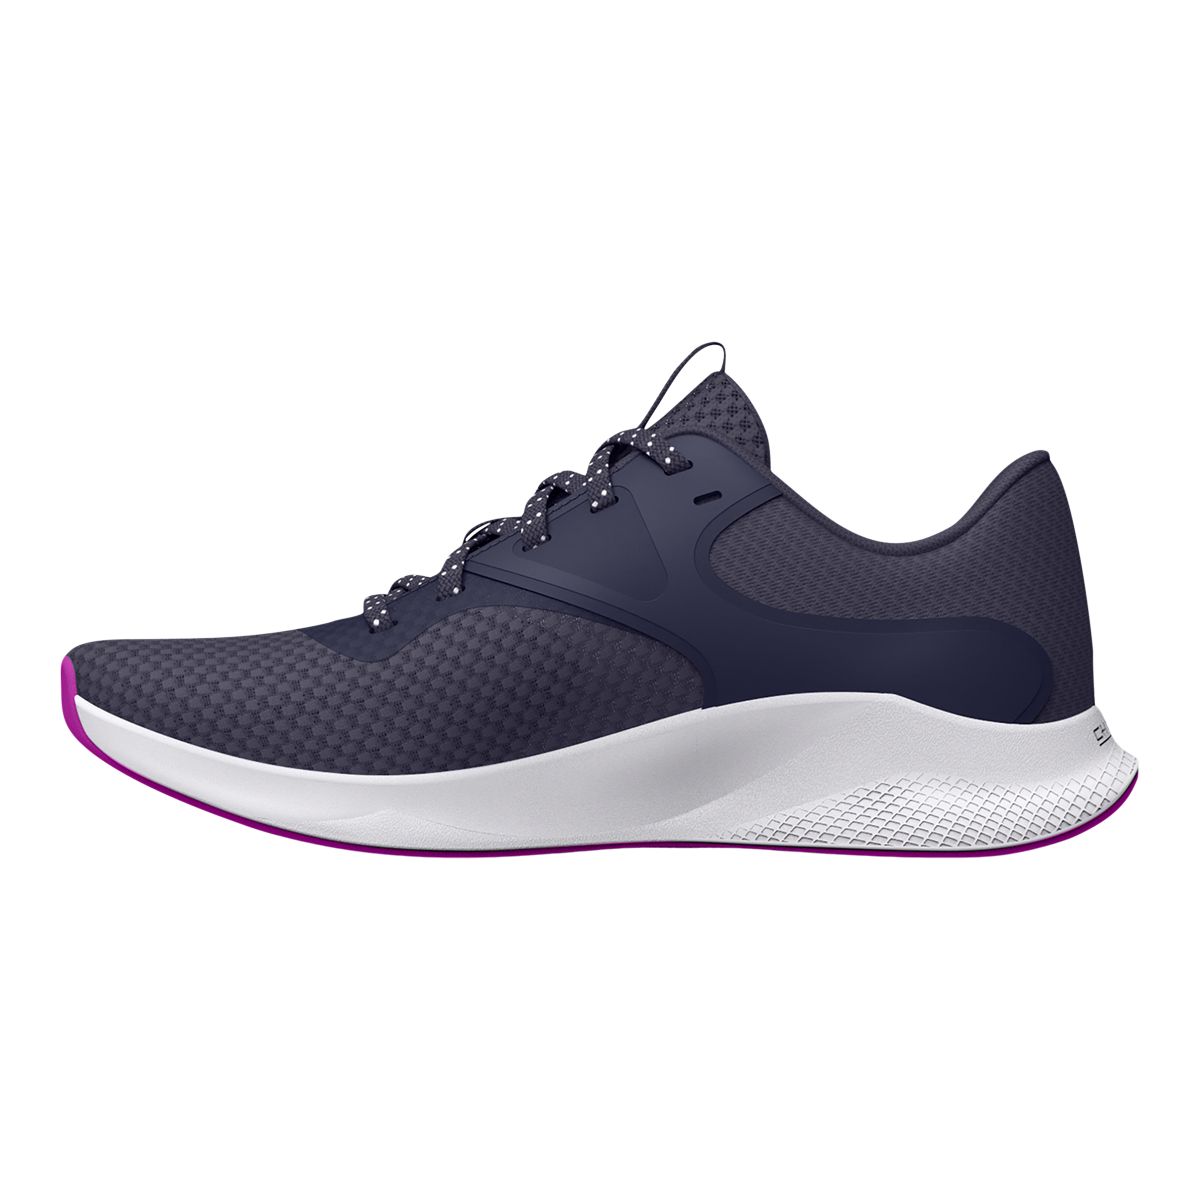 Under Armour Women's Charged Aurora 2 Training Shoes